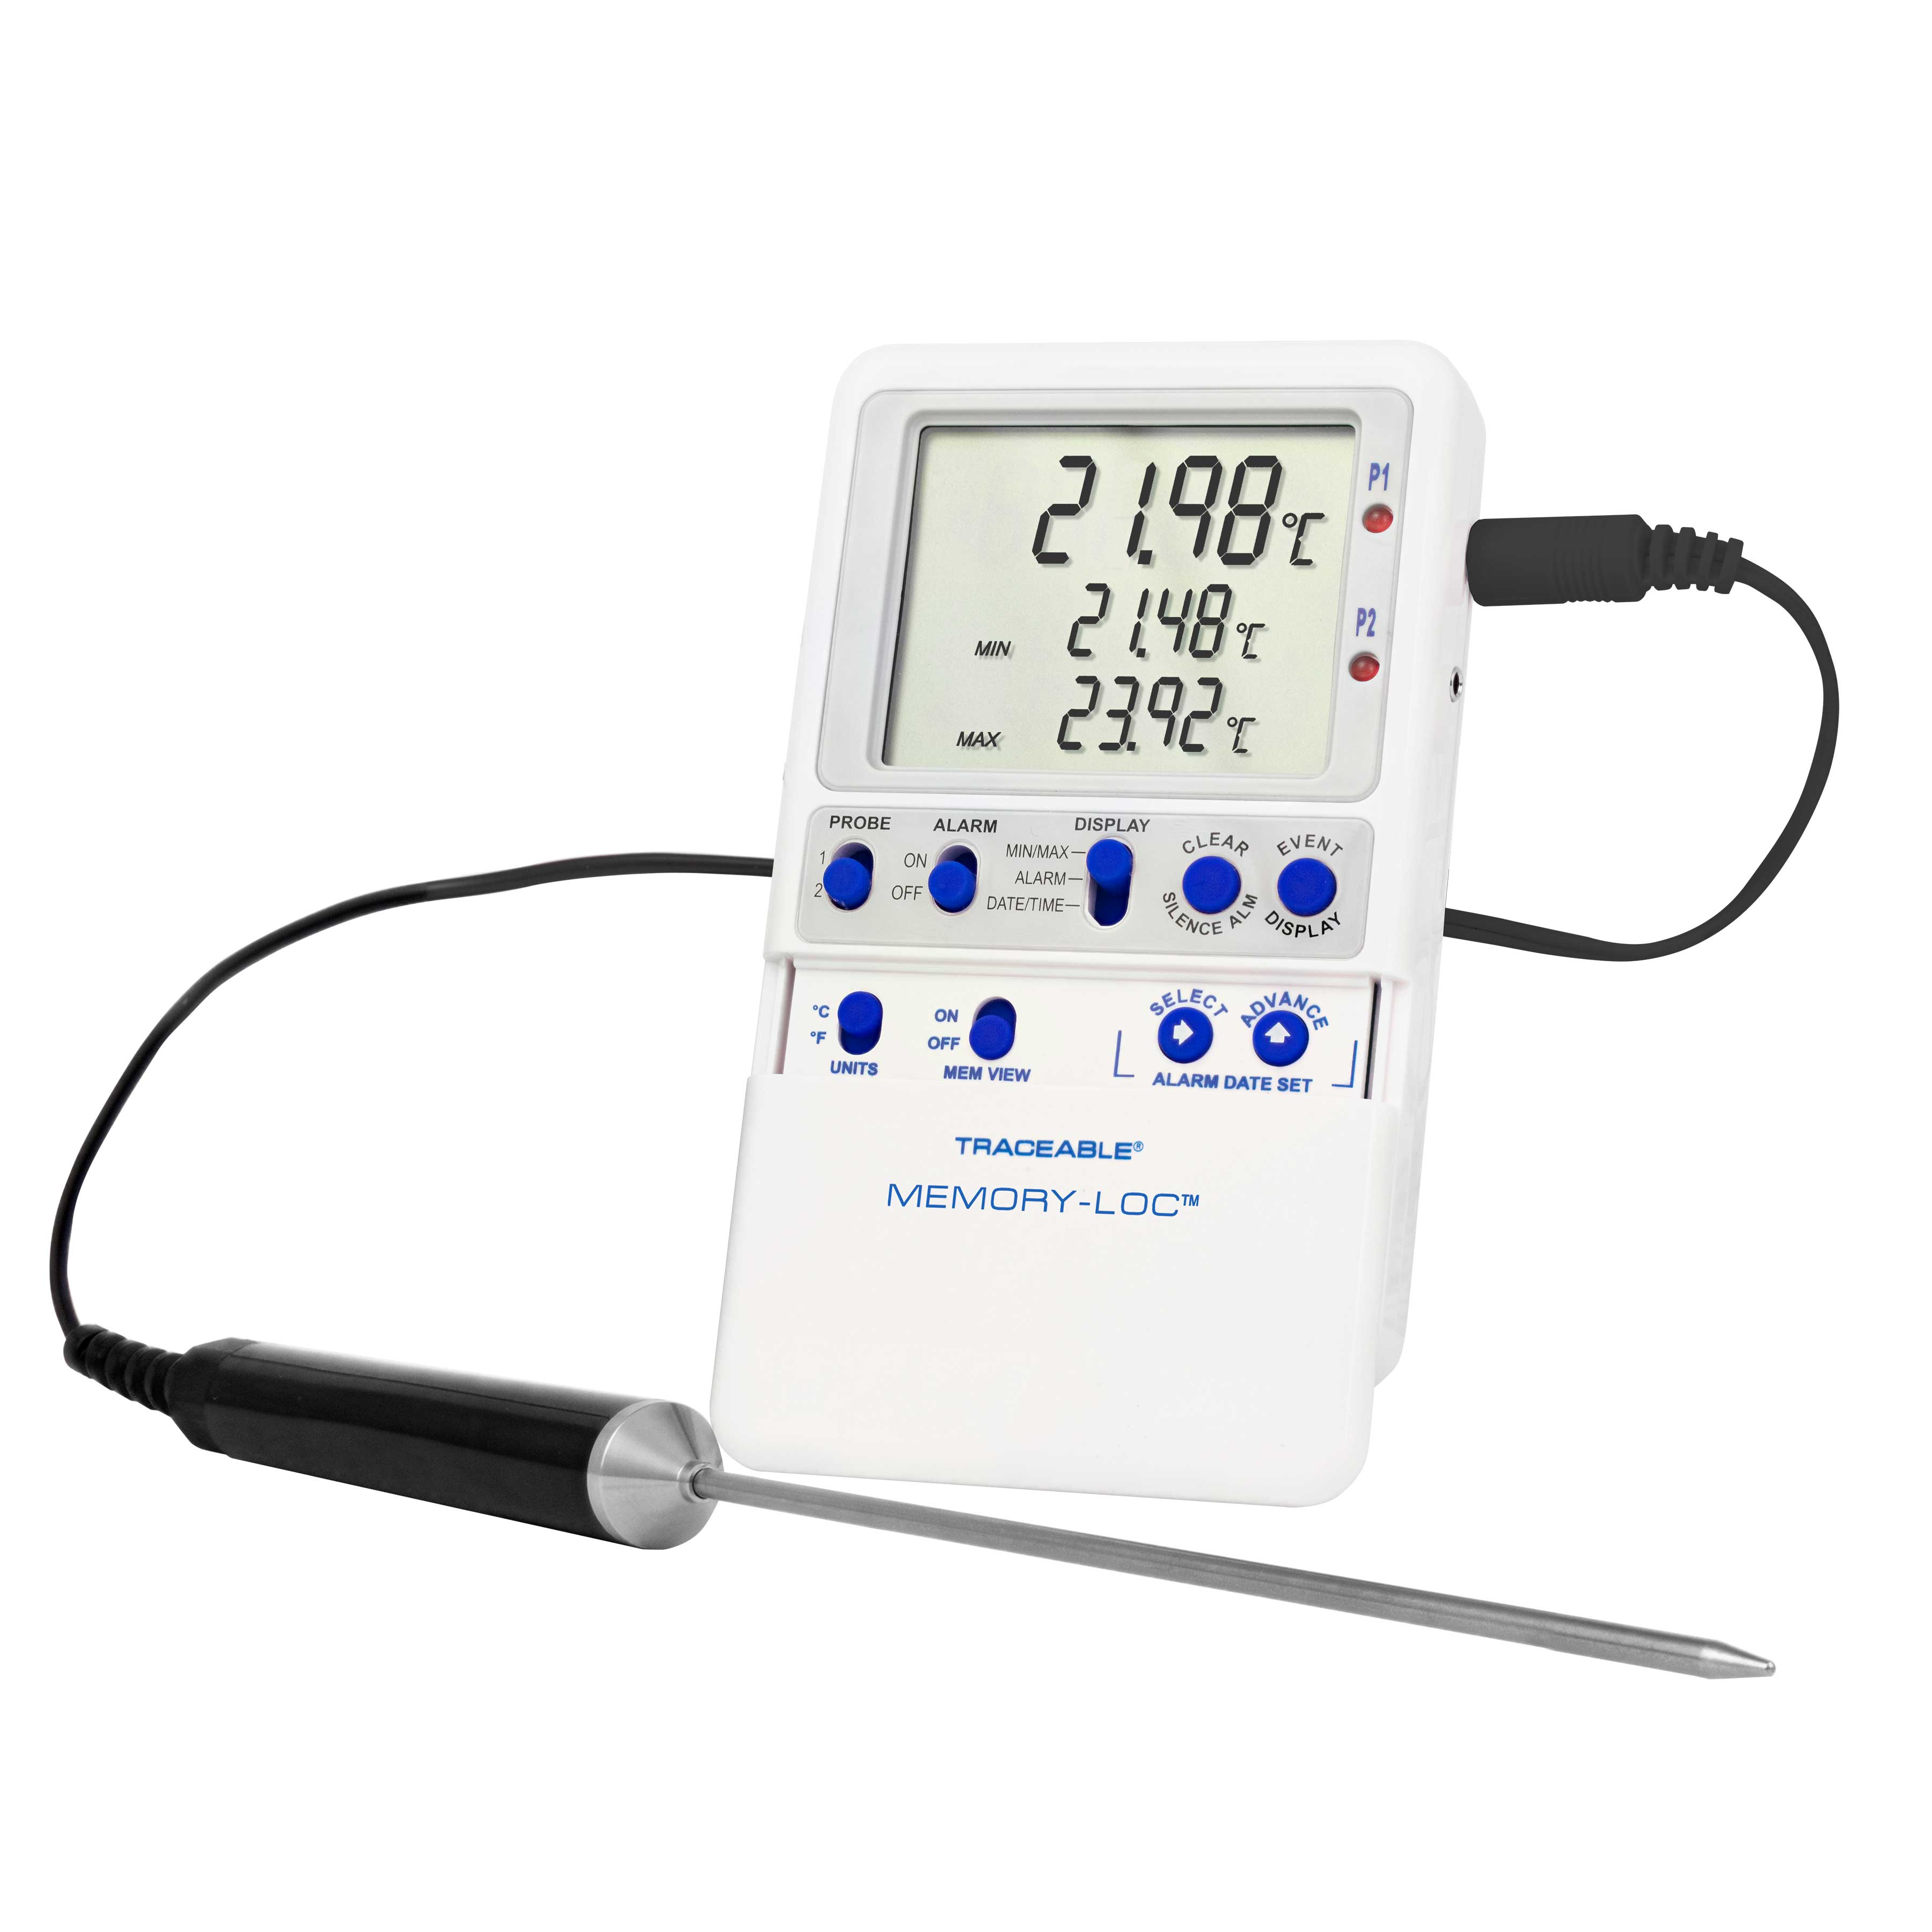 Memory-Loc datalogging digital thermometer. TRACEABLE. Range: –50.00 to 70.00°C. Accuracy: ±0.25°C. Resolution: 0.01°C. Probes: 1 stainless-steel probe. Application: Refrigerators and Freezers